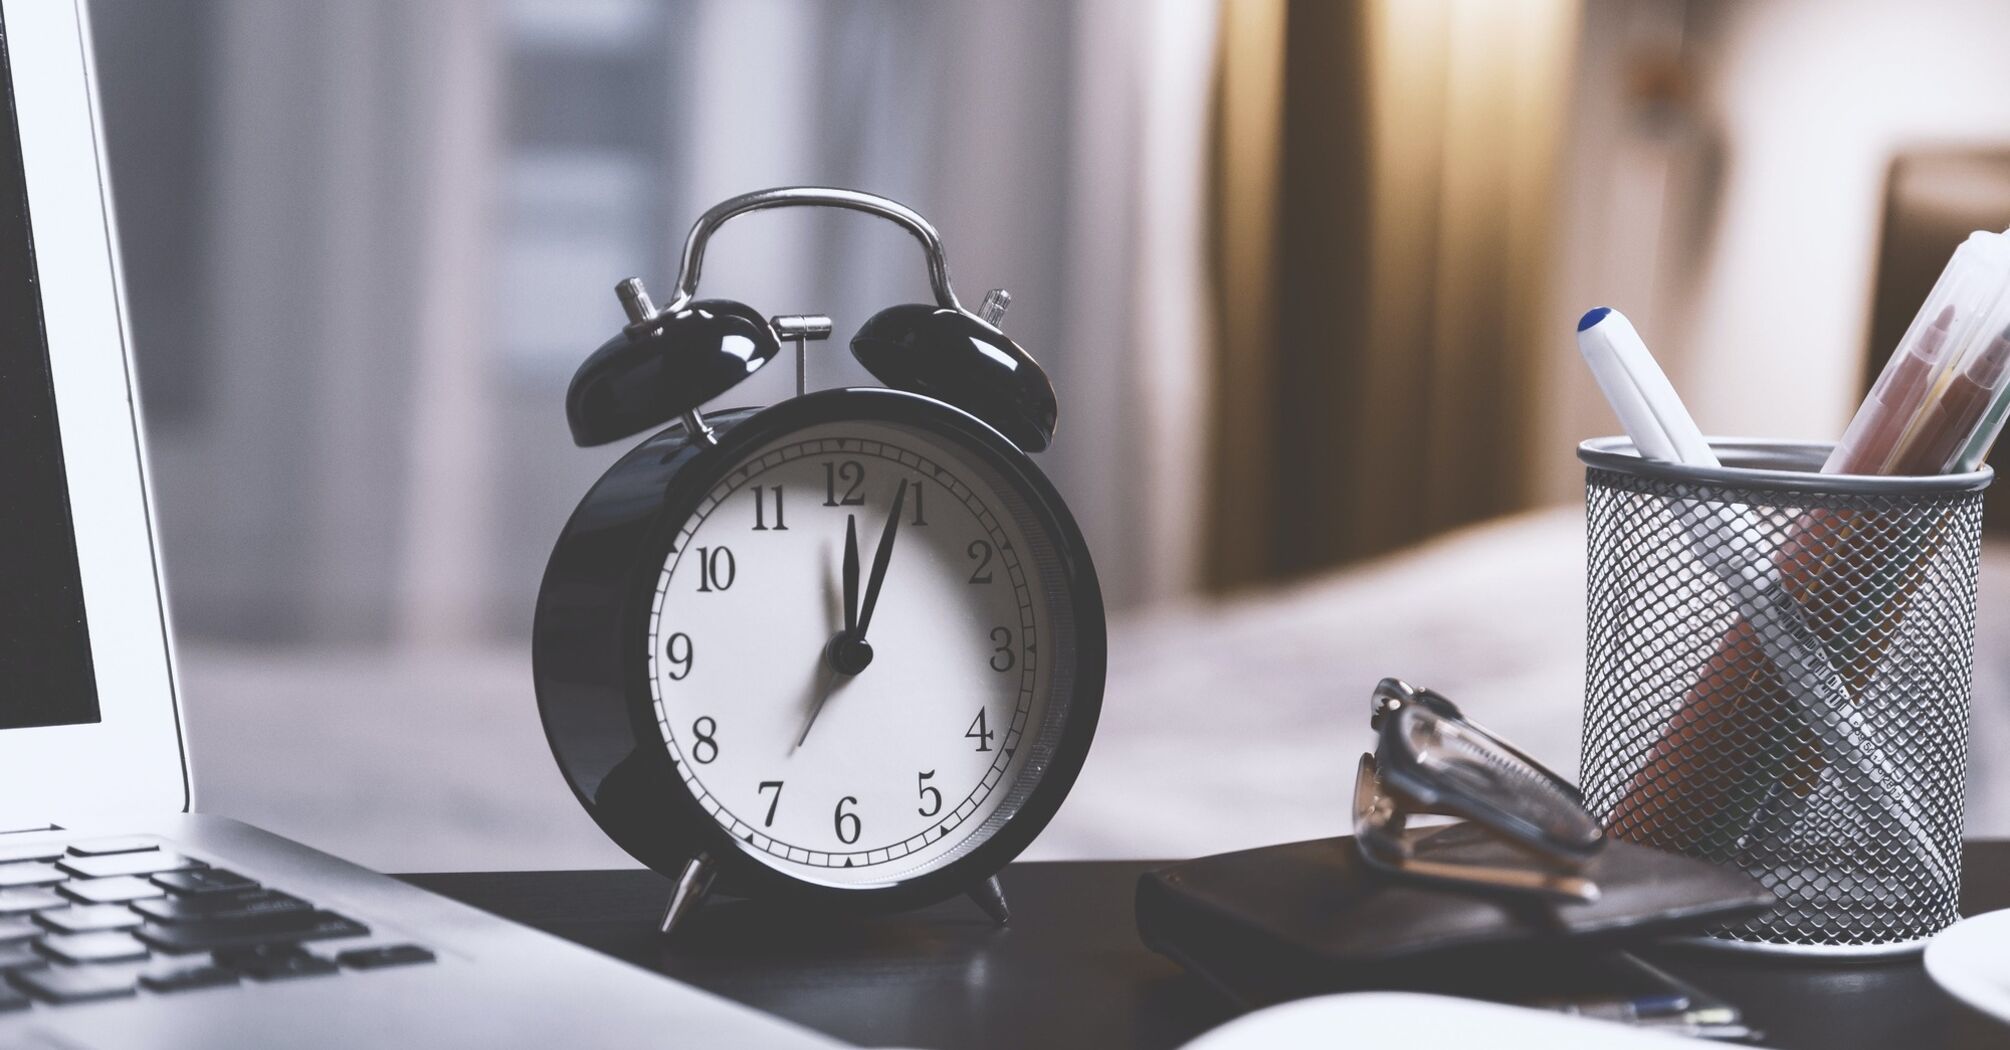 5 important tips on time management: How to control your schedule